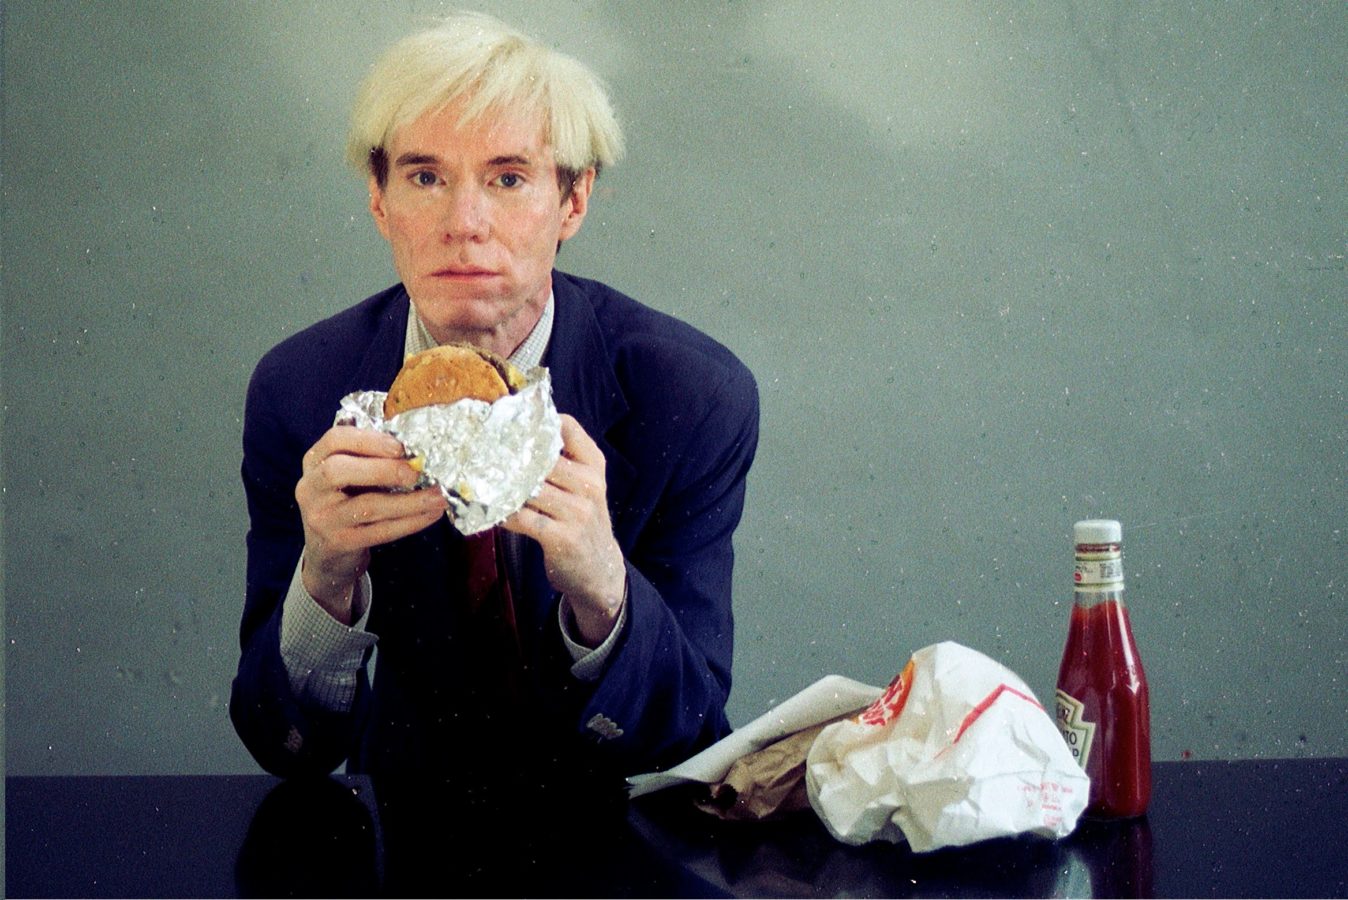 Warhol and his burger in 66 Scenes from America